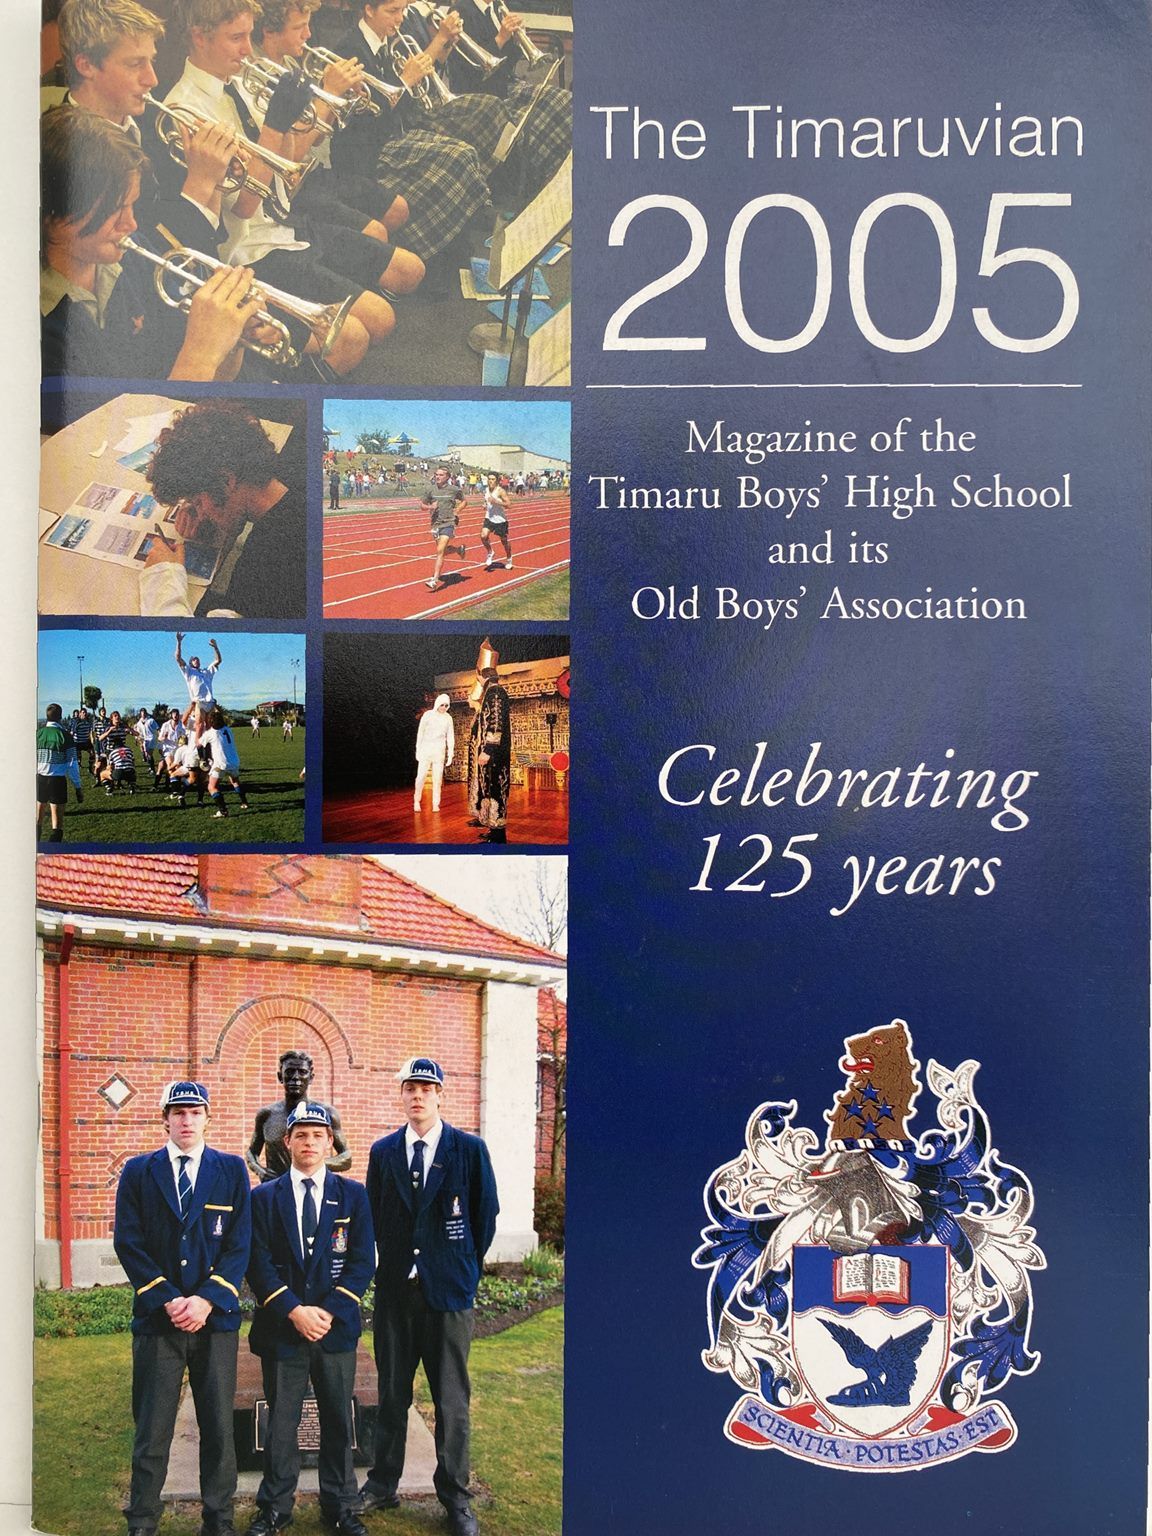 THE TIMARUVIAN: Magazine of the Timaru Boys' High School and its Old Boys' Association 2005